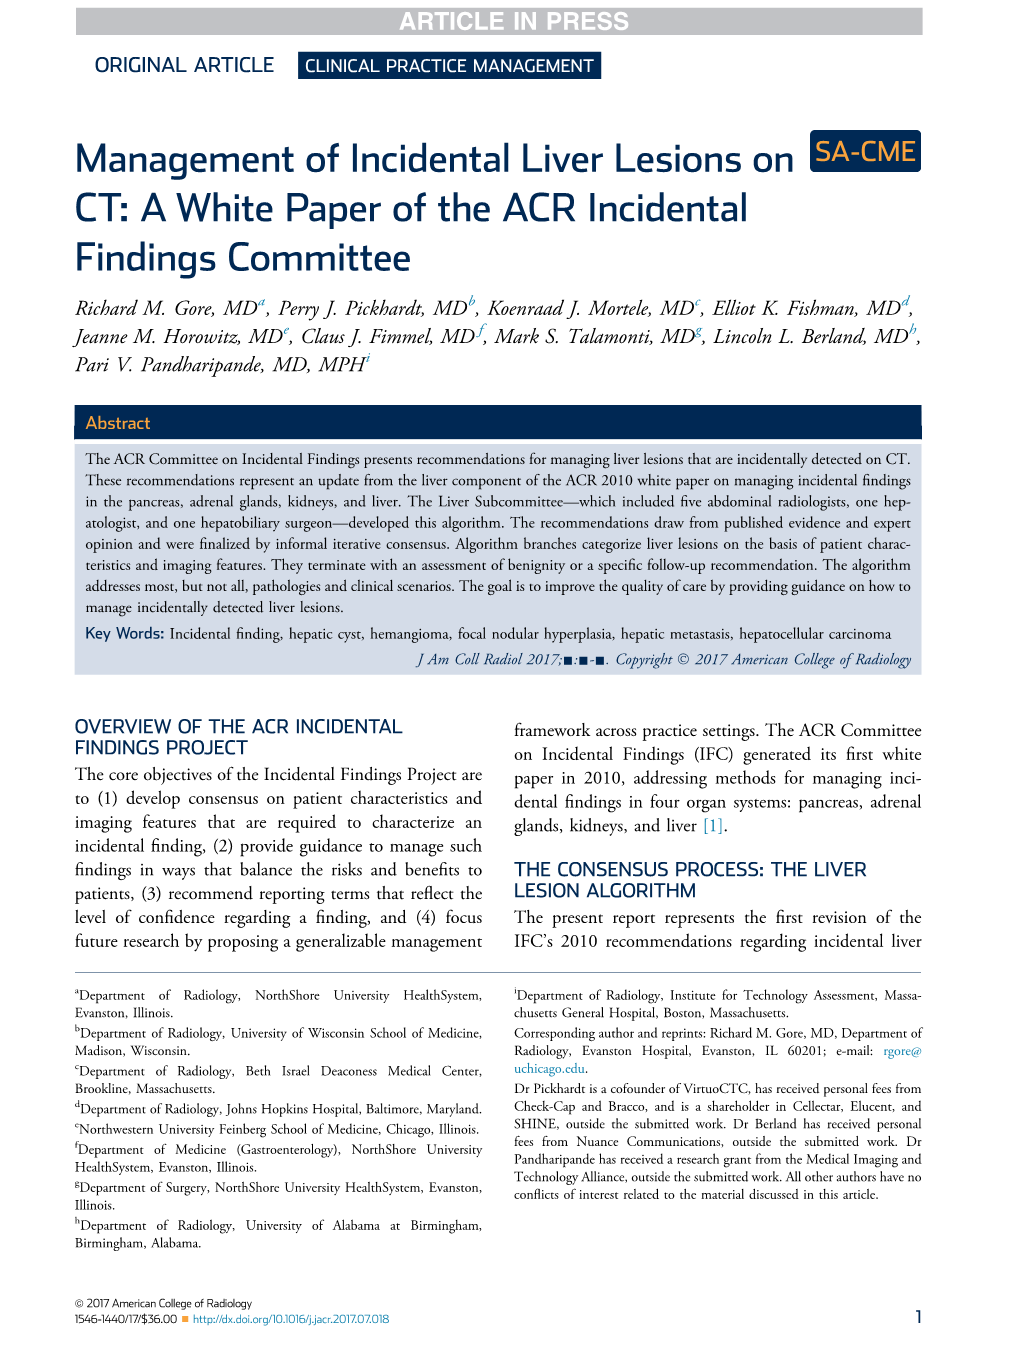 Management of Incidental Liver Lesions on CT: a White Paper of the ACR Incidental Findings Committee Richard M